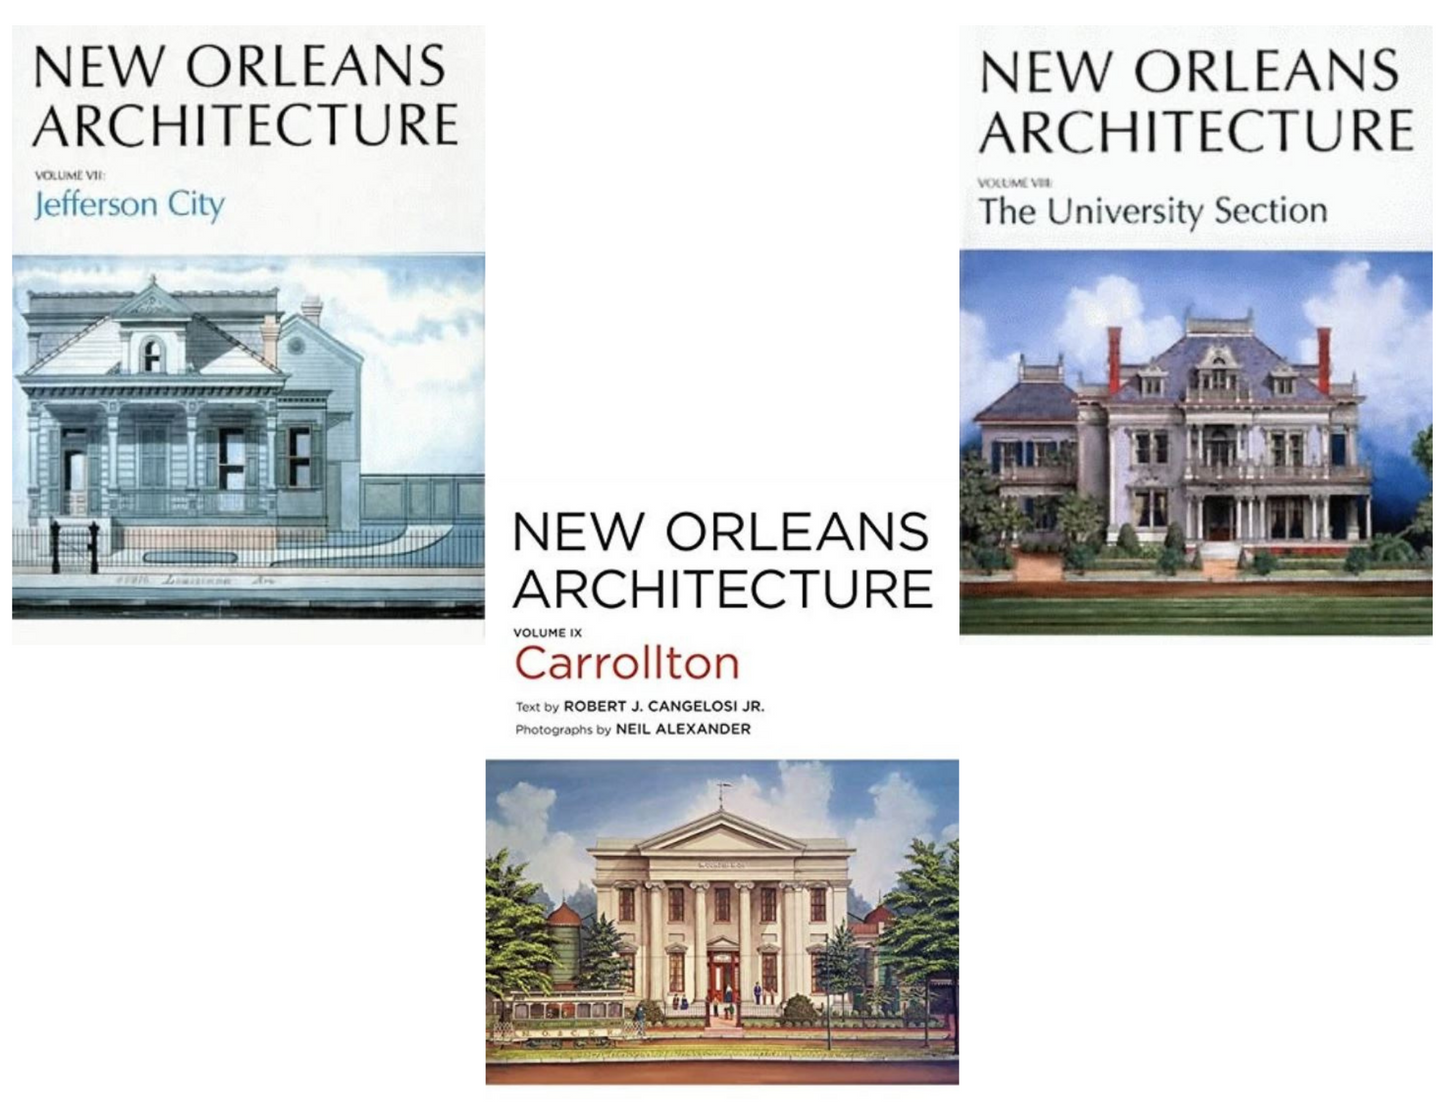 The Cangelosi Series - New Orleans Architecture Volumes VII-IX